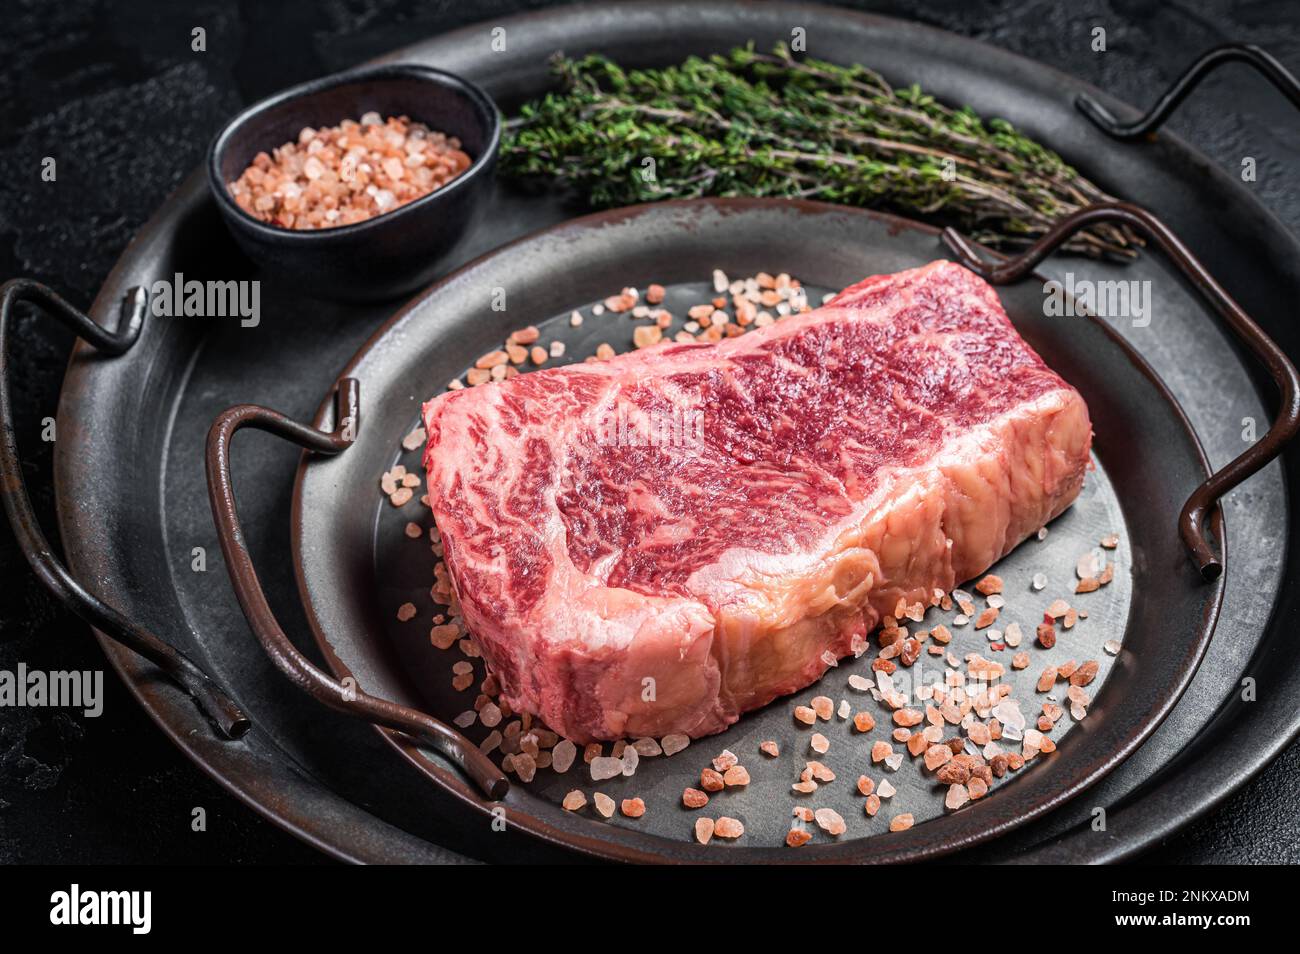 Fresh Raw Wagyu striploin or New york steak in a steel tray with herbs. Black background. Top view. Stock Photo